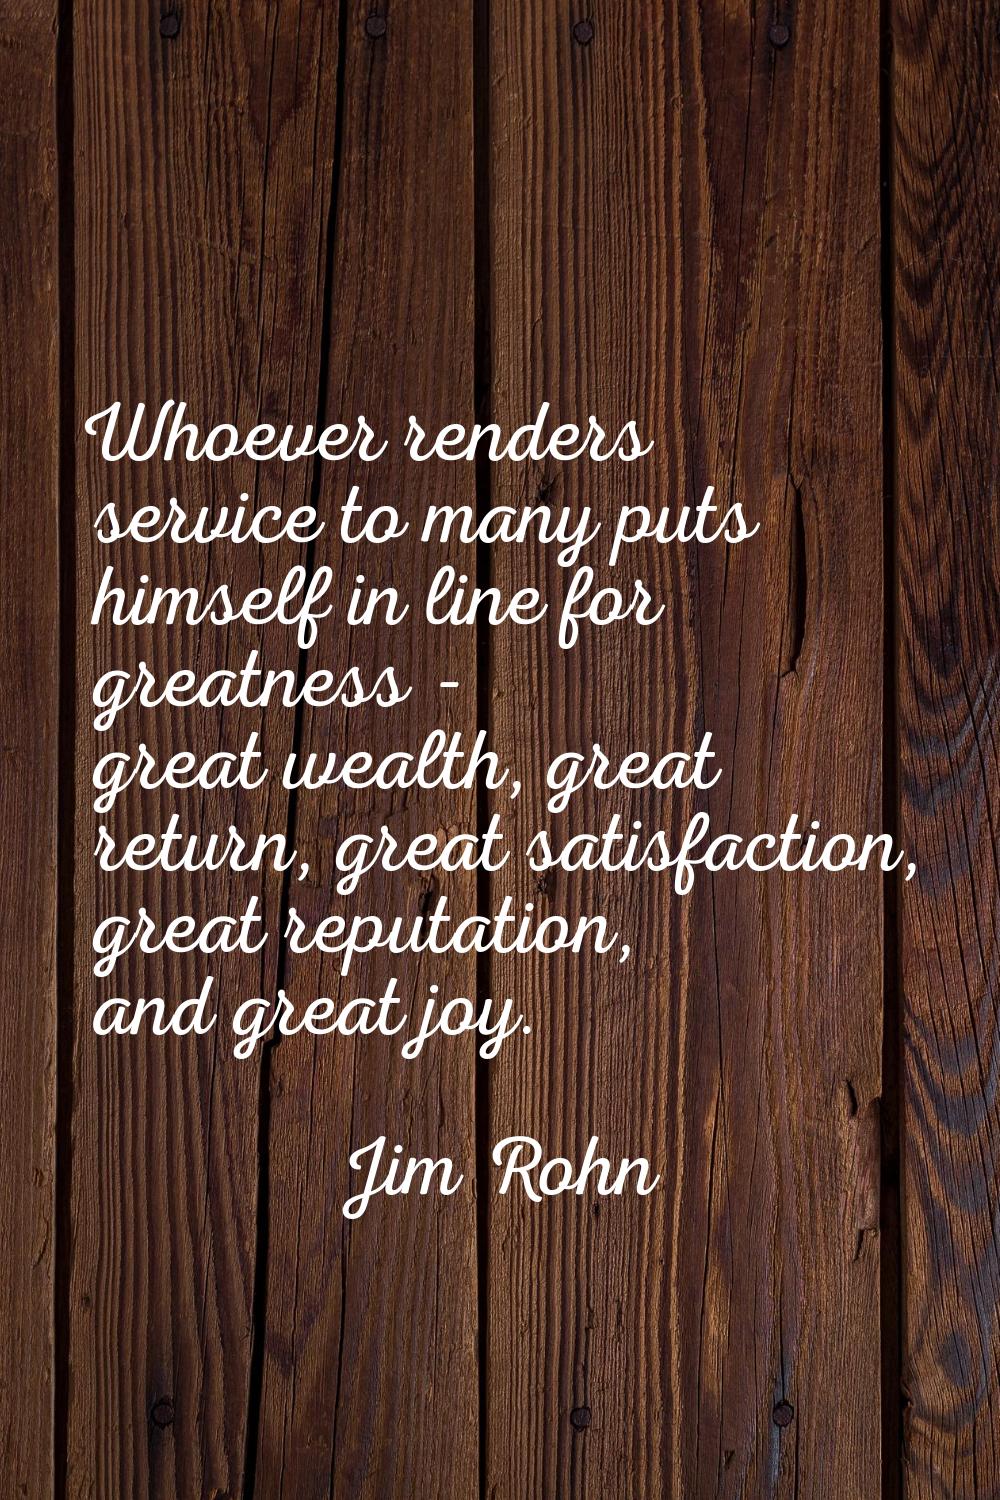 Whoever renders service to many puts himself in line for greatness - great wealth, great return, gr